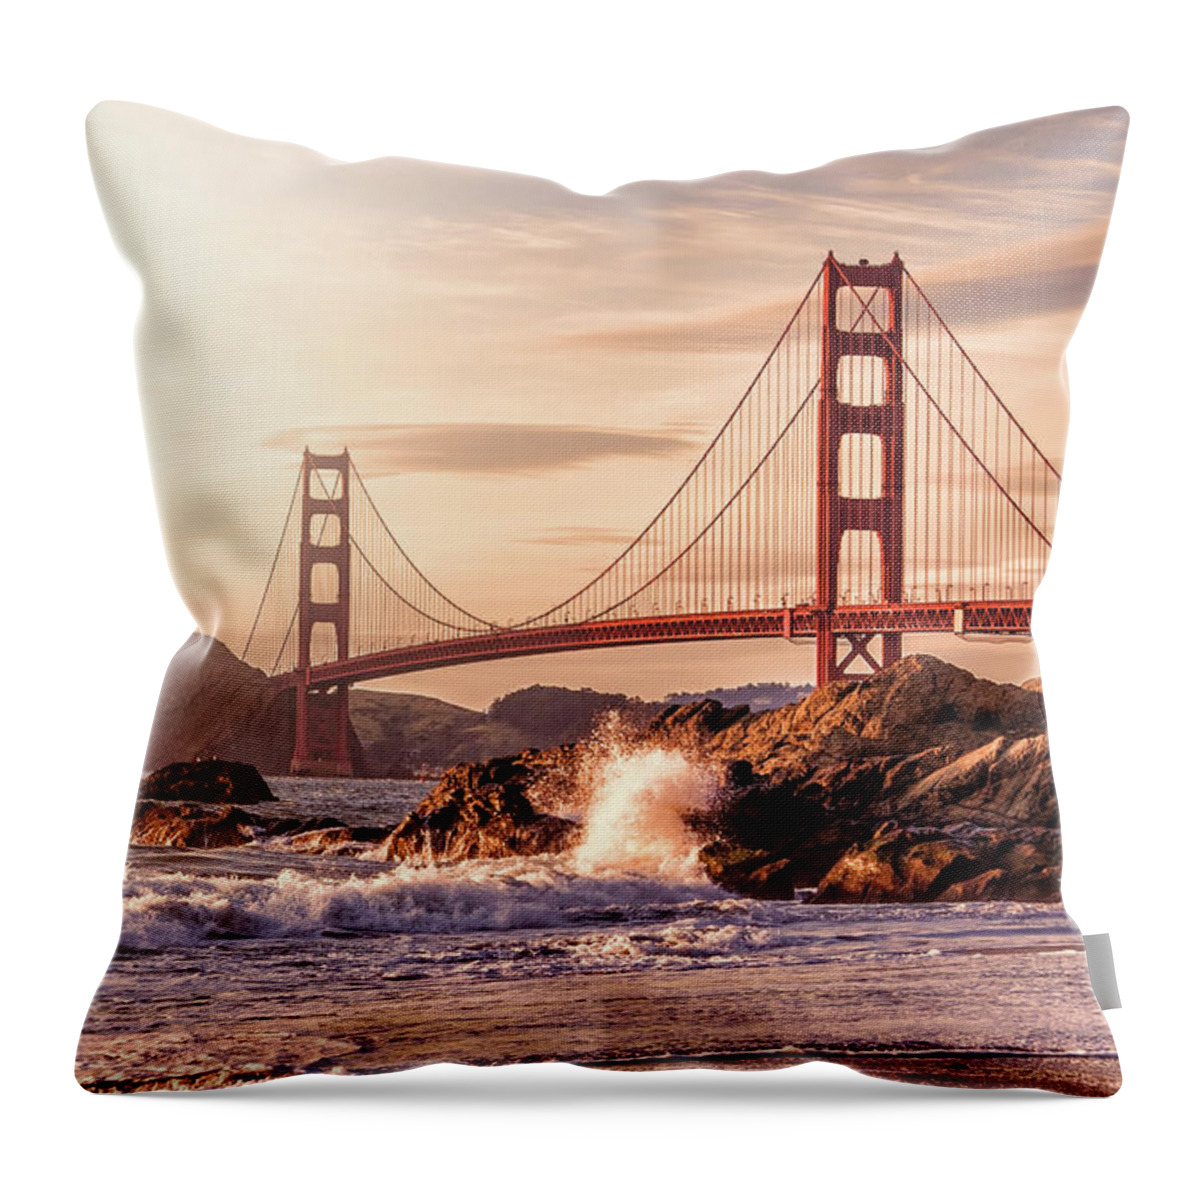 Water's Edge Throw Pillow featuring the photograph Golden Gate Bridge From Baker Beach by Karsten May